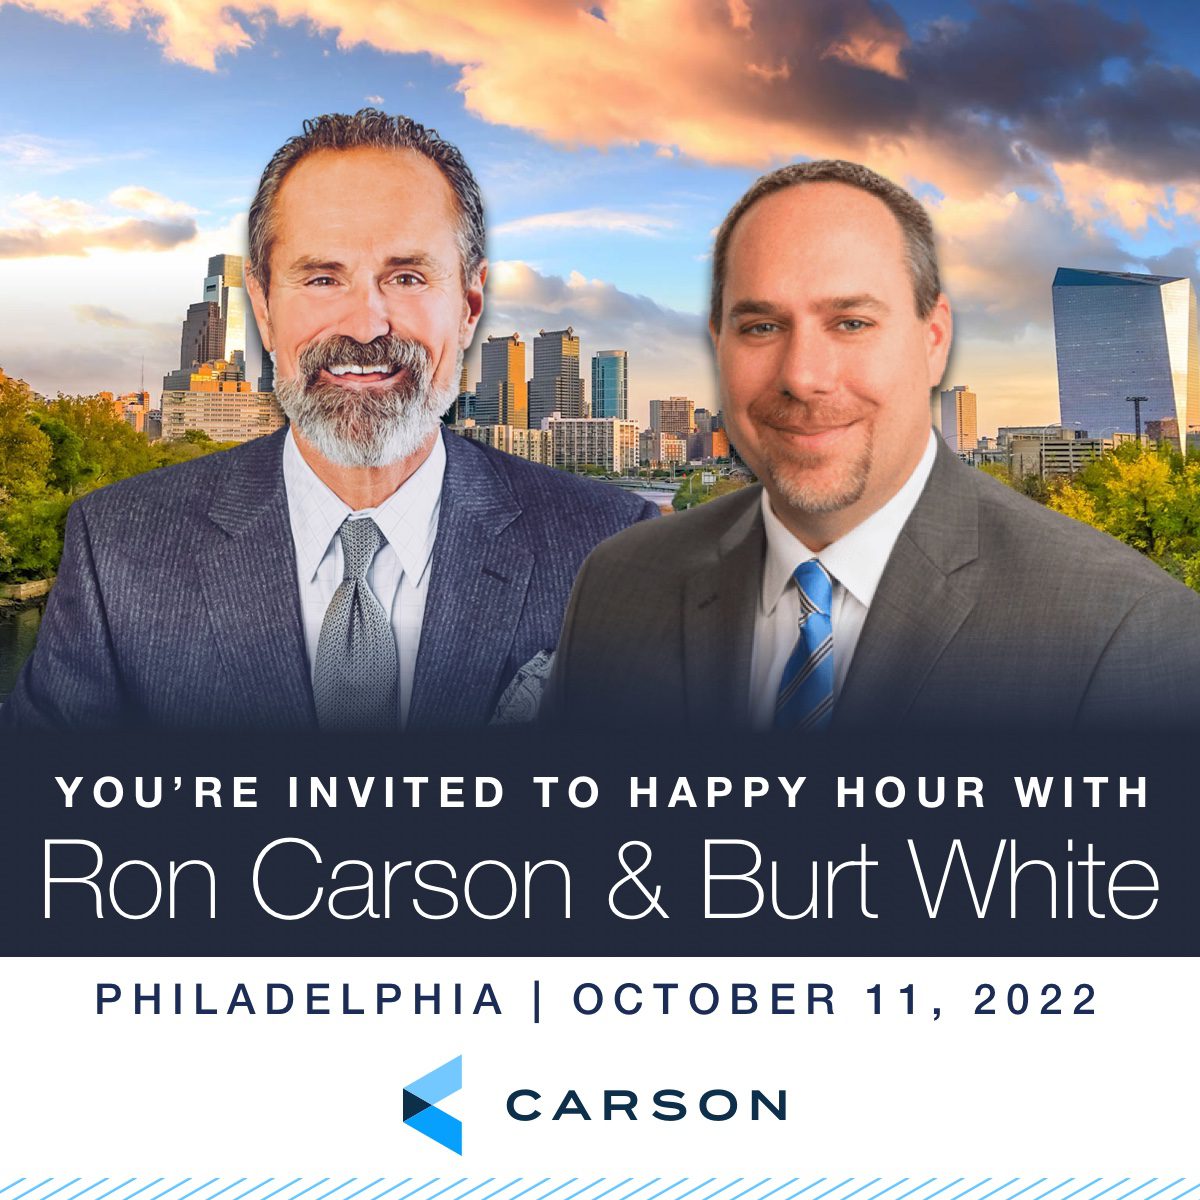 Join Ron Carson and Burt White for Happy Hour in Philadelphia